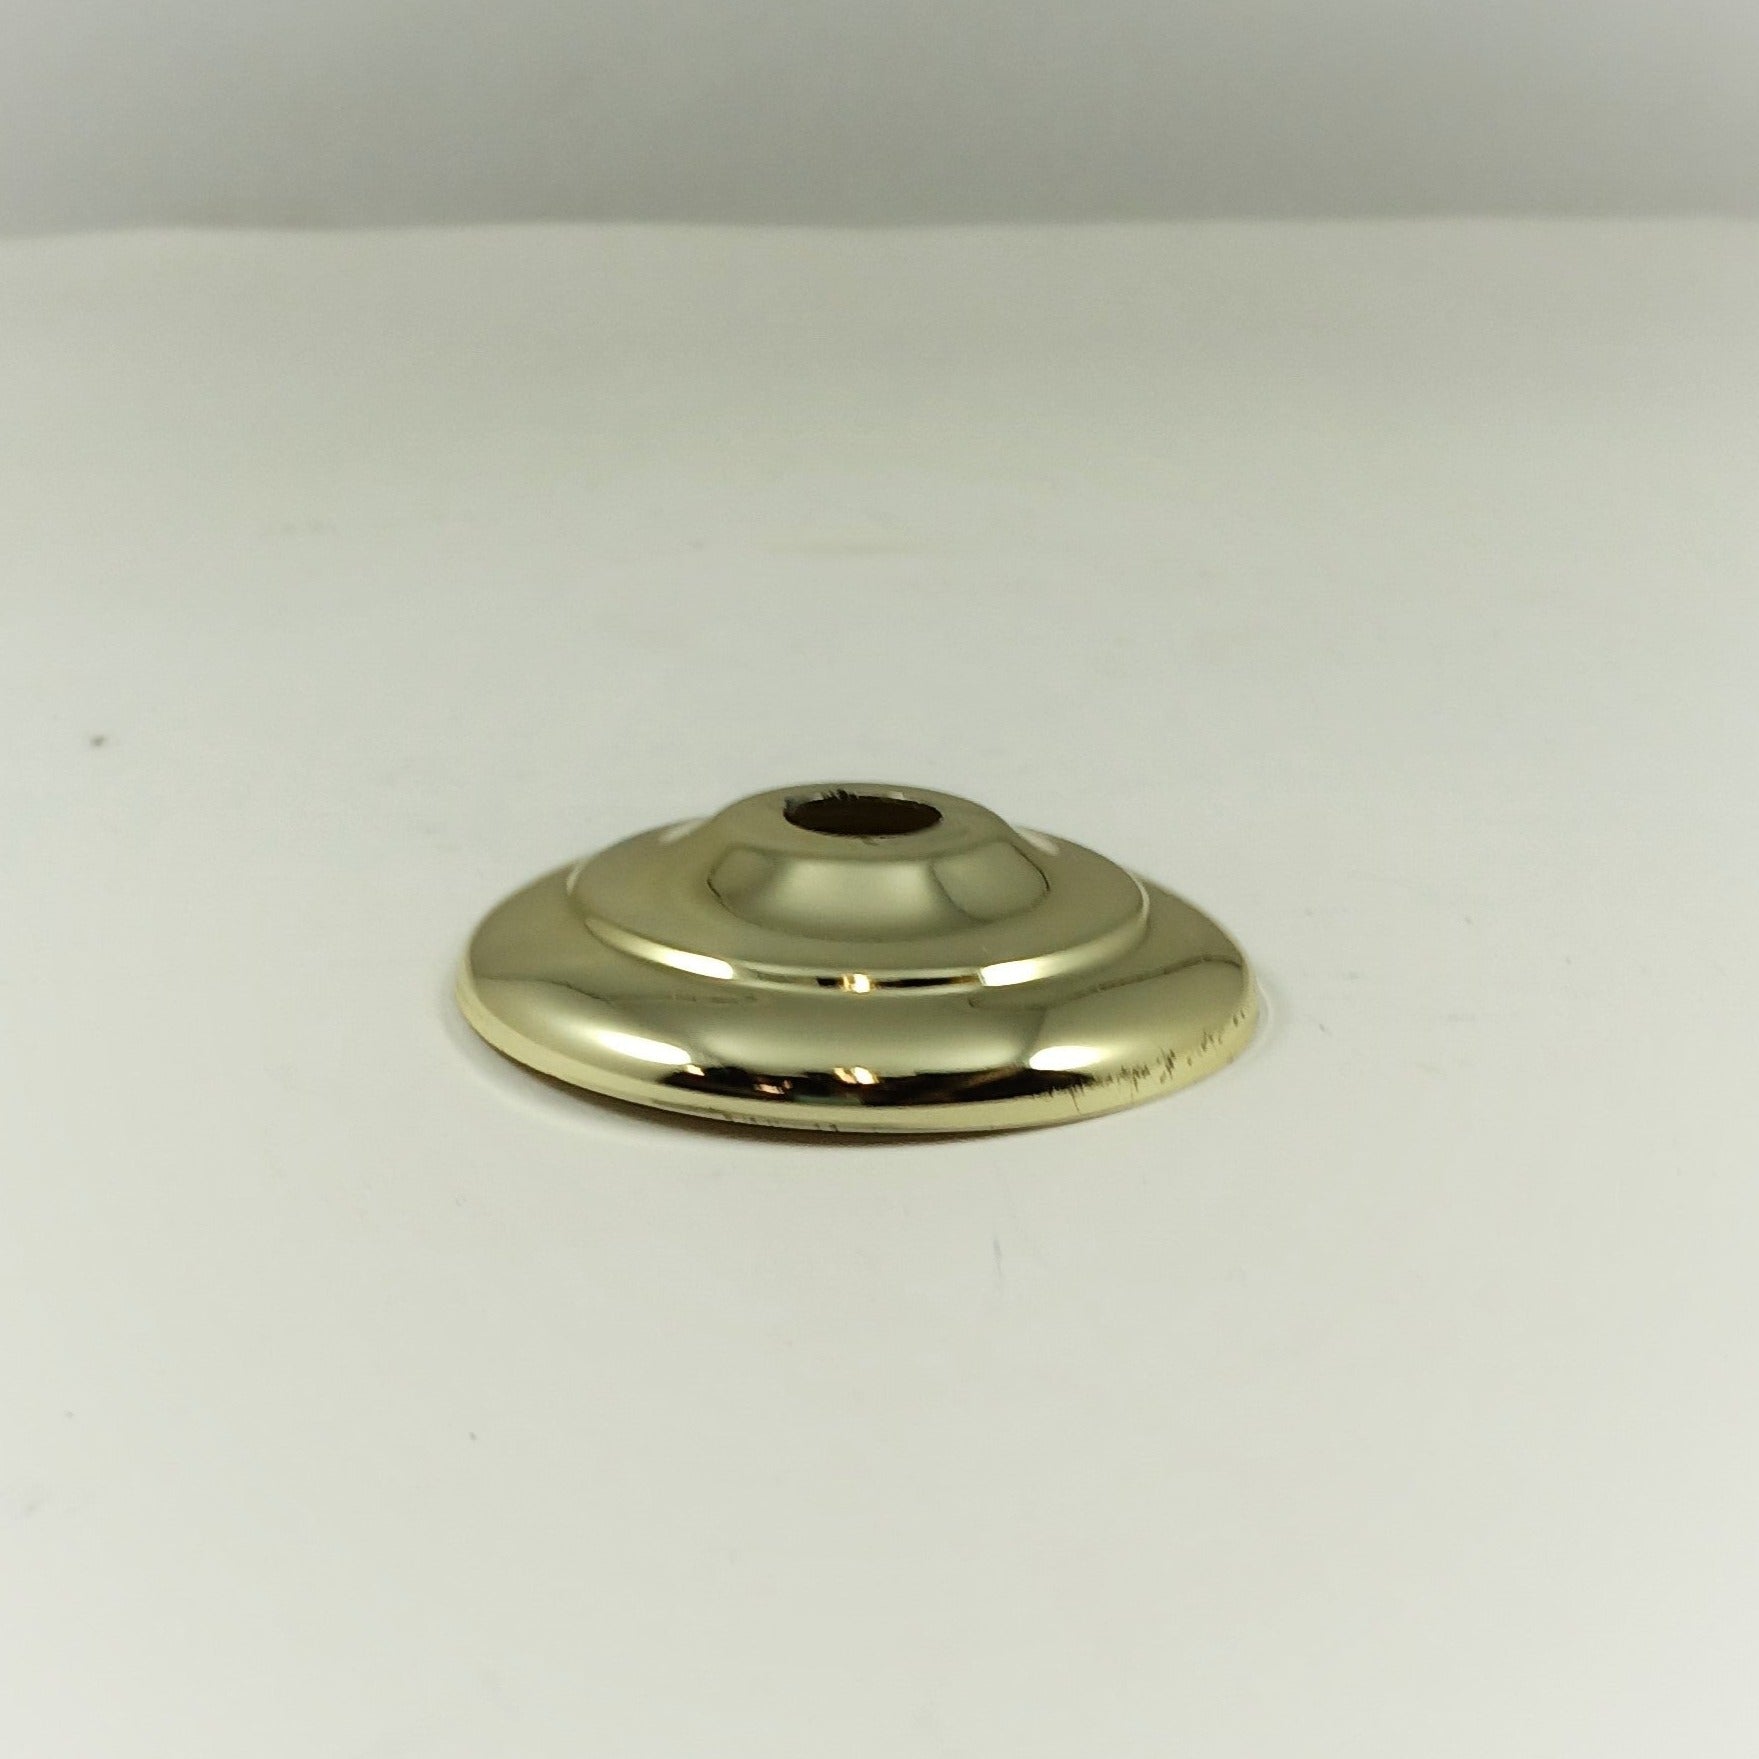 Brass Vase Cap - Polished & Lacquered - 2"